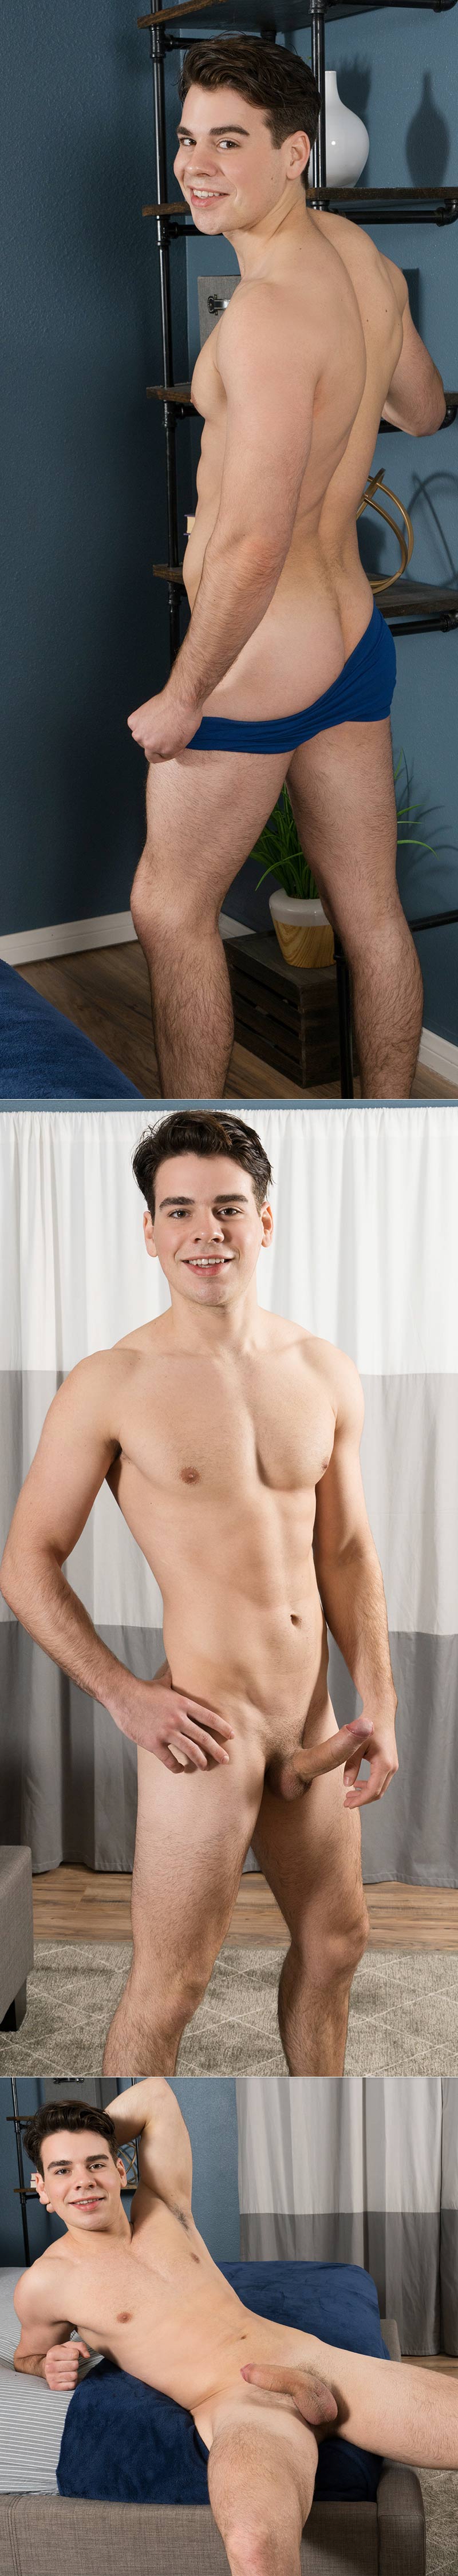 Declan (Introductory Solo) at SeanCody